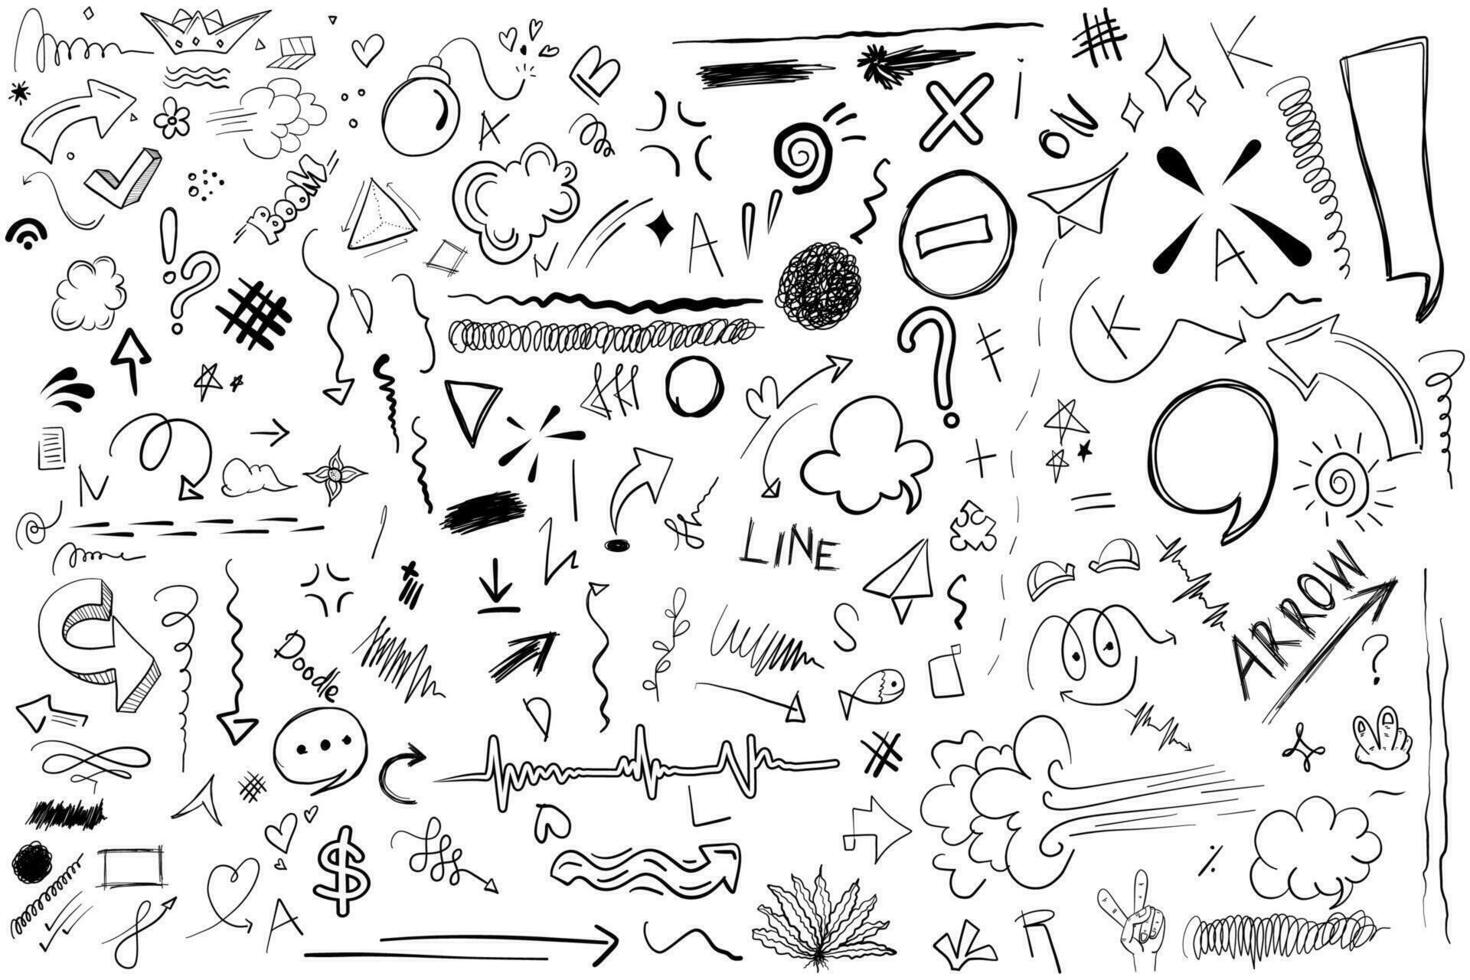 doodle set elements abstract arrows  lines  stars  text bubbles and other hand drawn elements vector